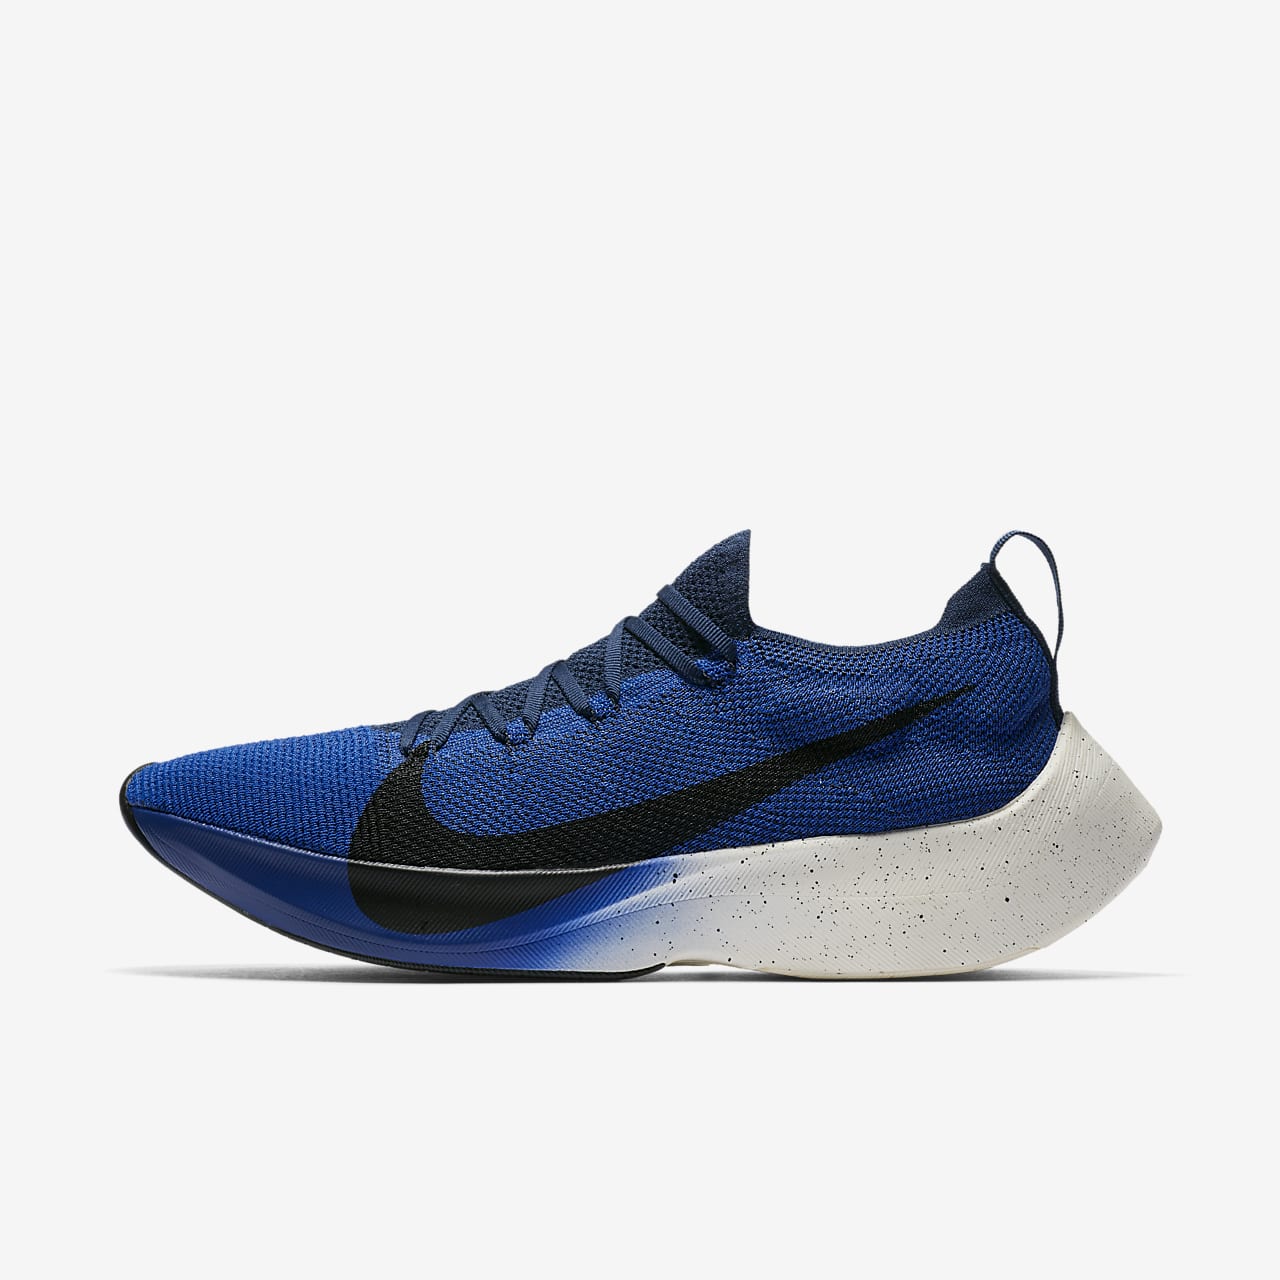 Chaussure Nike React Vapor Street Flyknit pour Homme